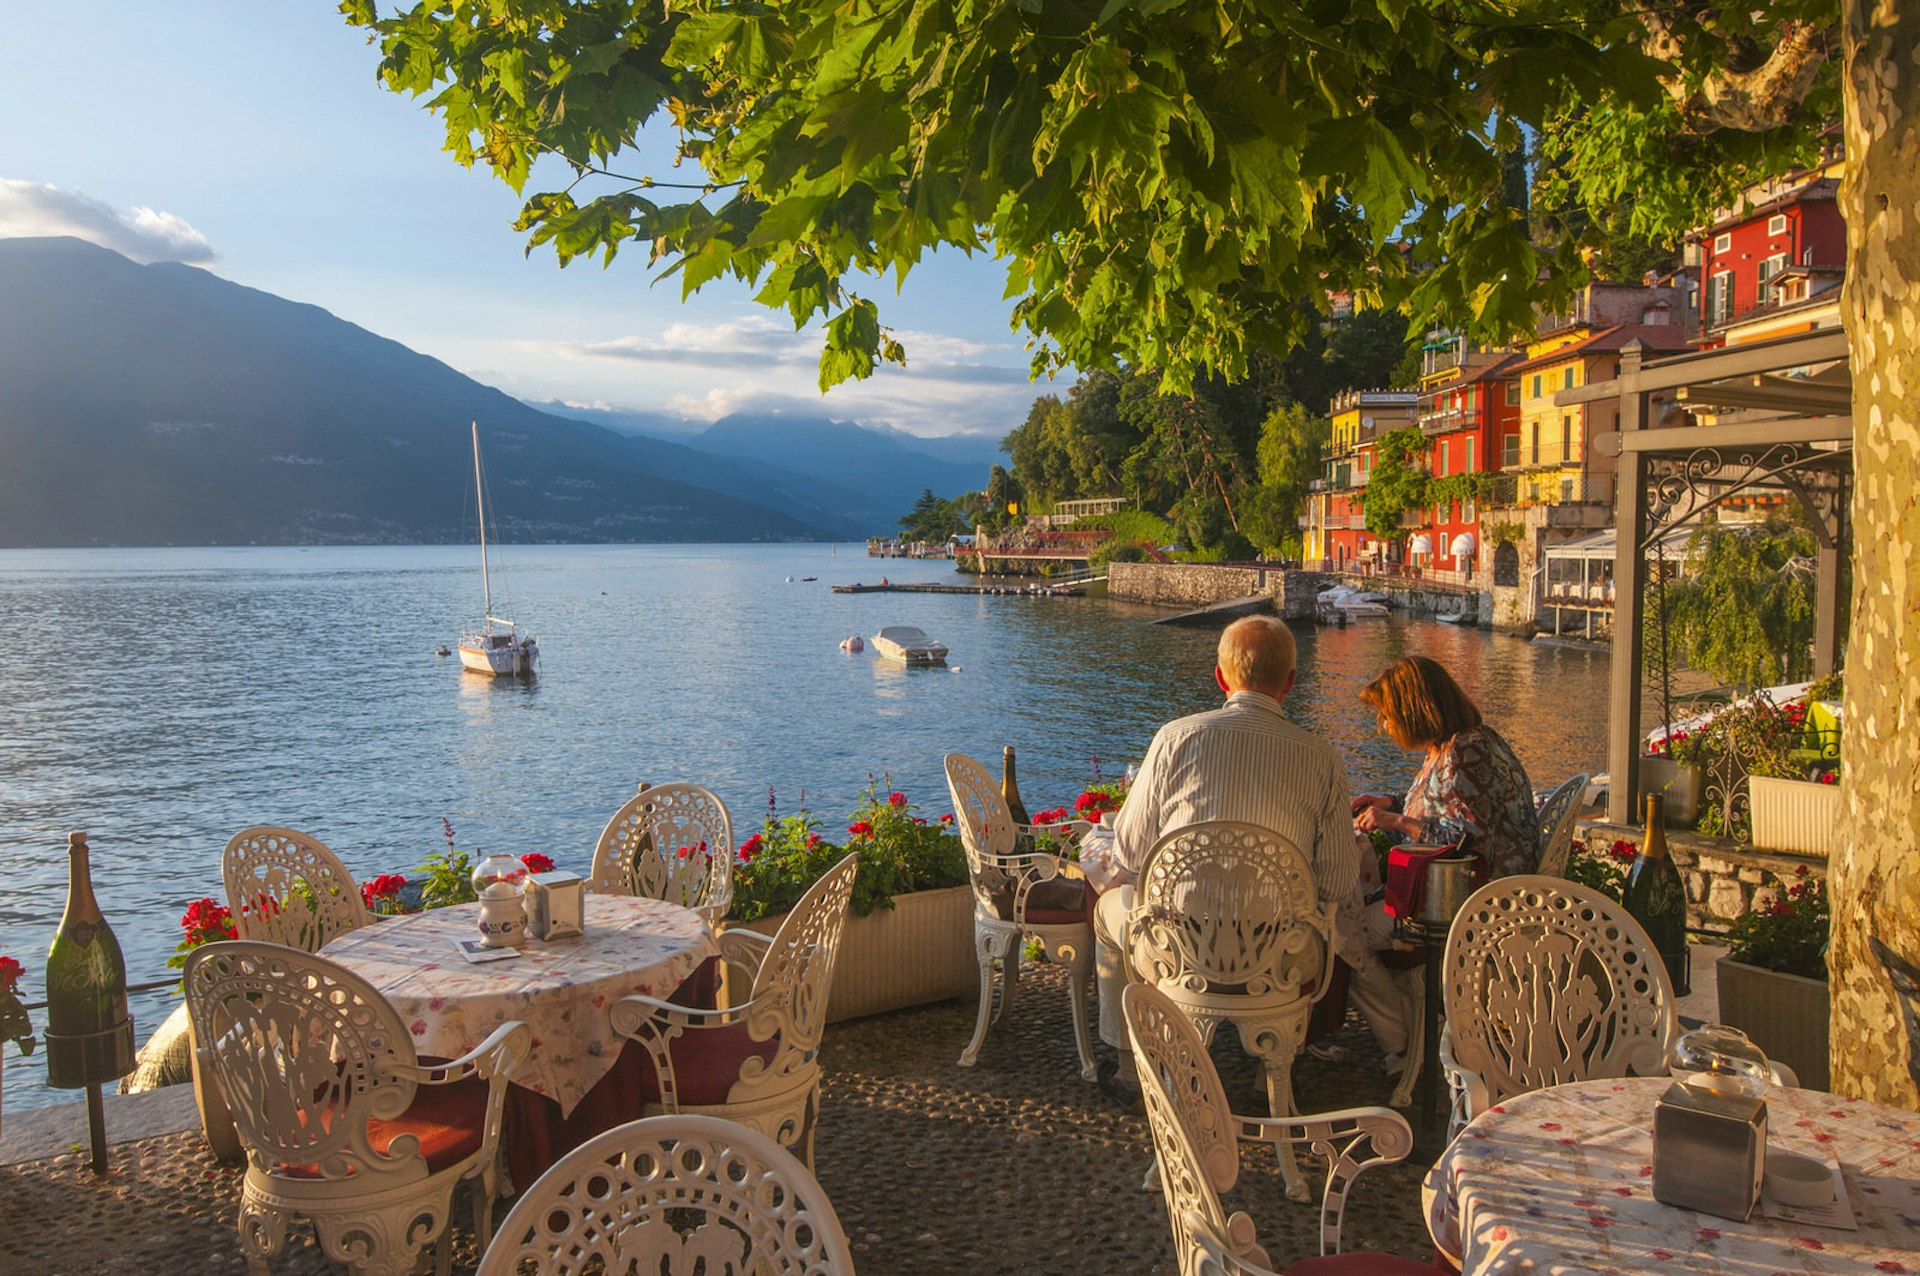 Romantic trip with kids in tow – a couple dine overlooking Lake Como, Italy.